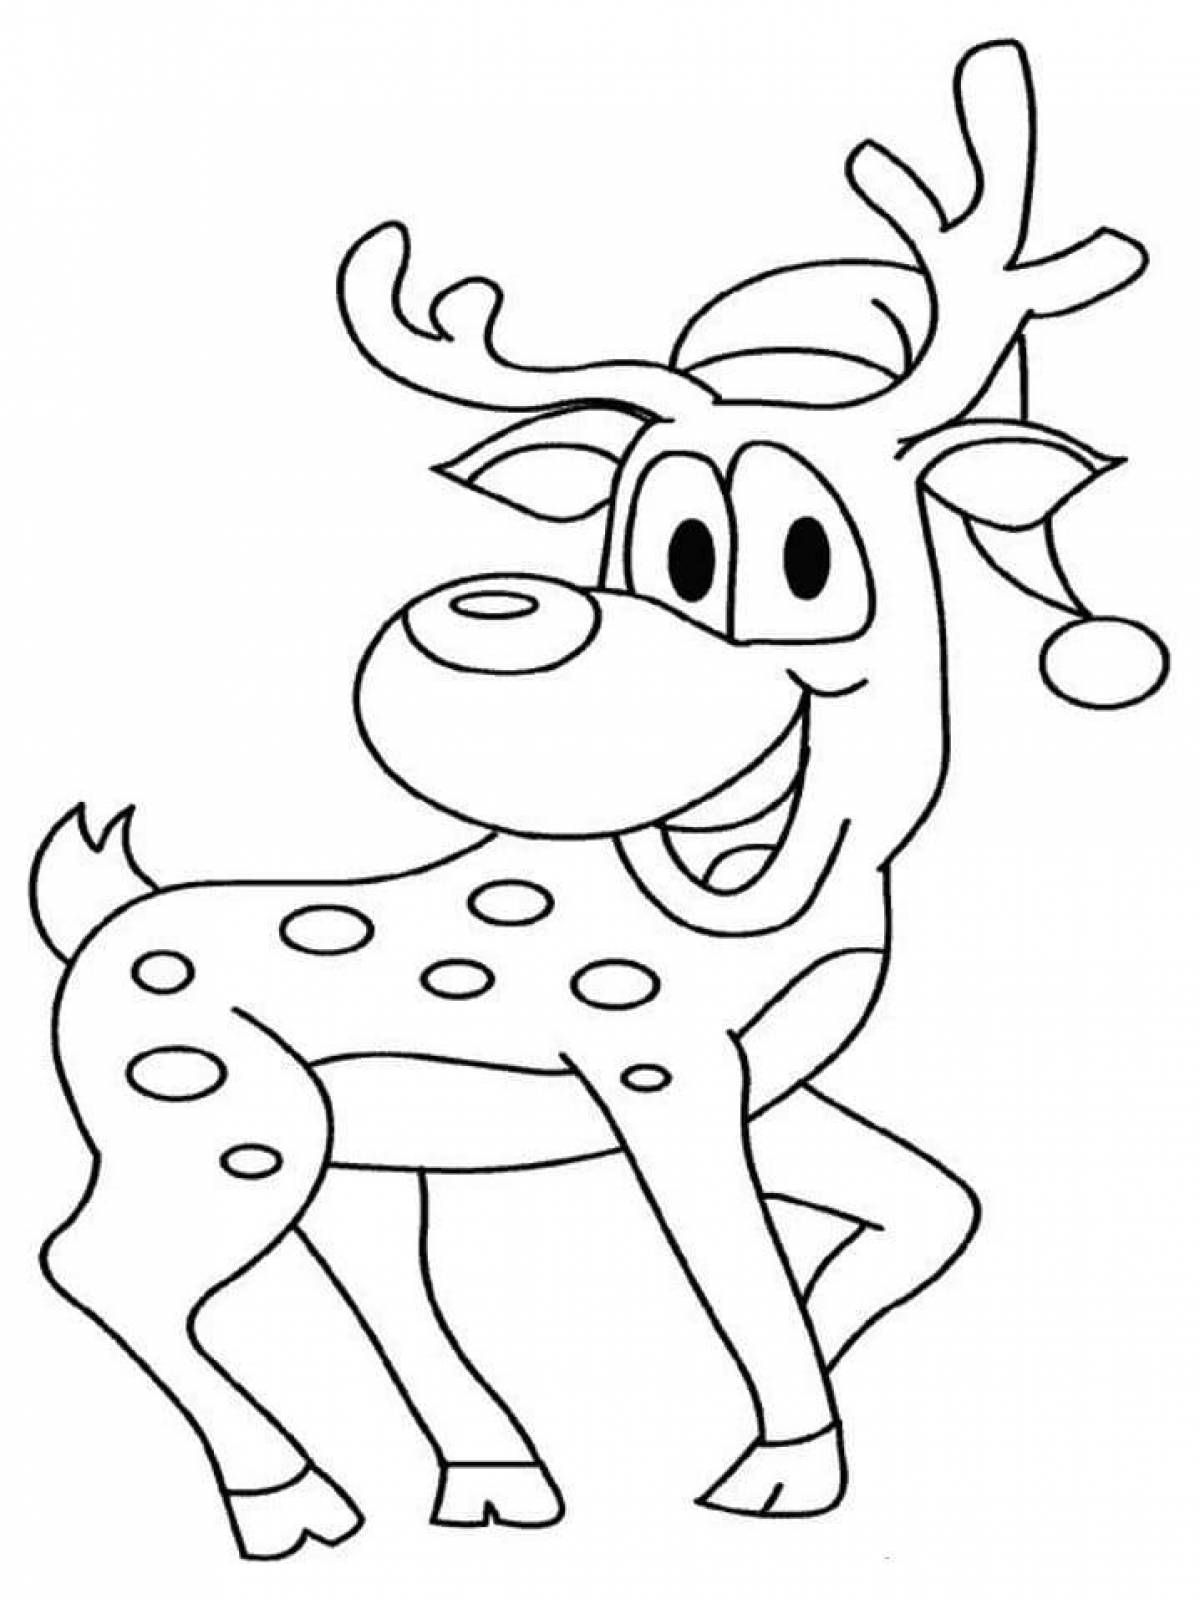 Sparkling Christmas deer coloring page